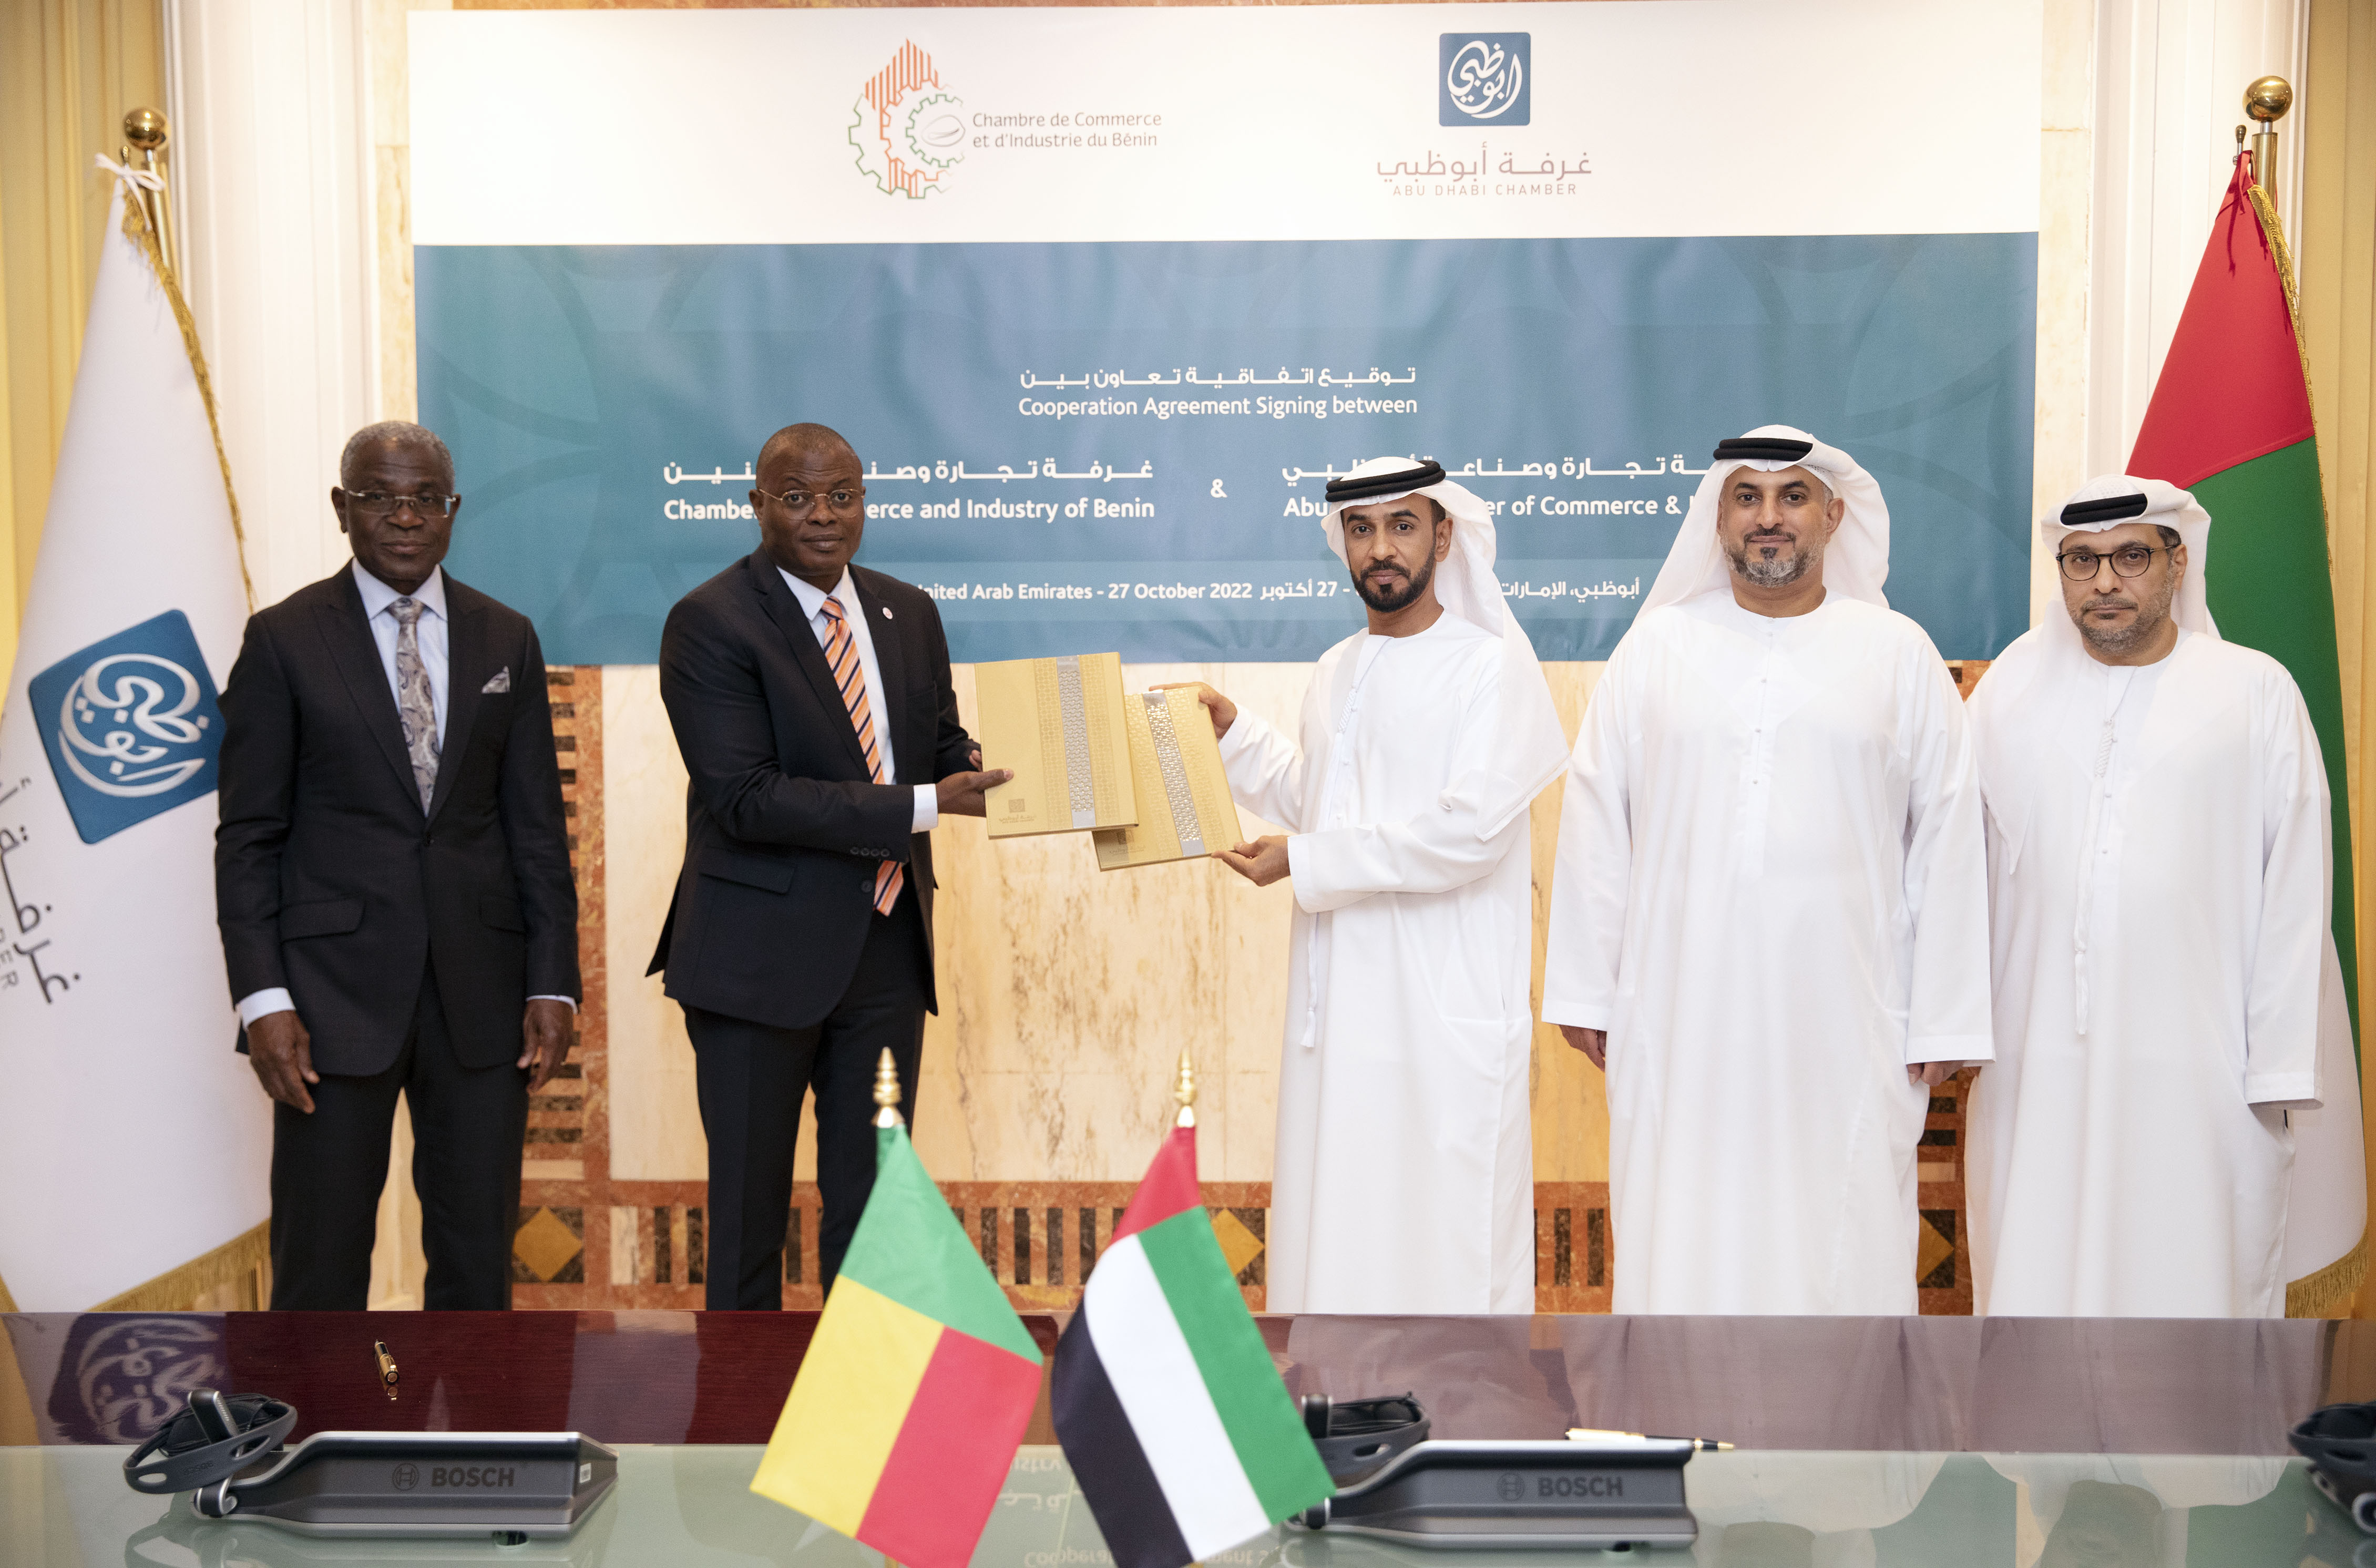 Abu Dhabi Chamber And Benin Chamber Collaborate To Promote Investment Opportunities